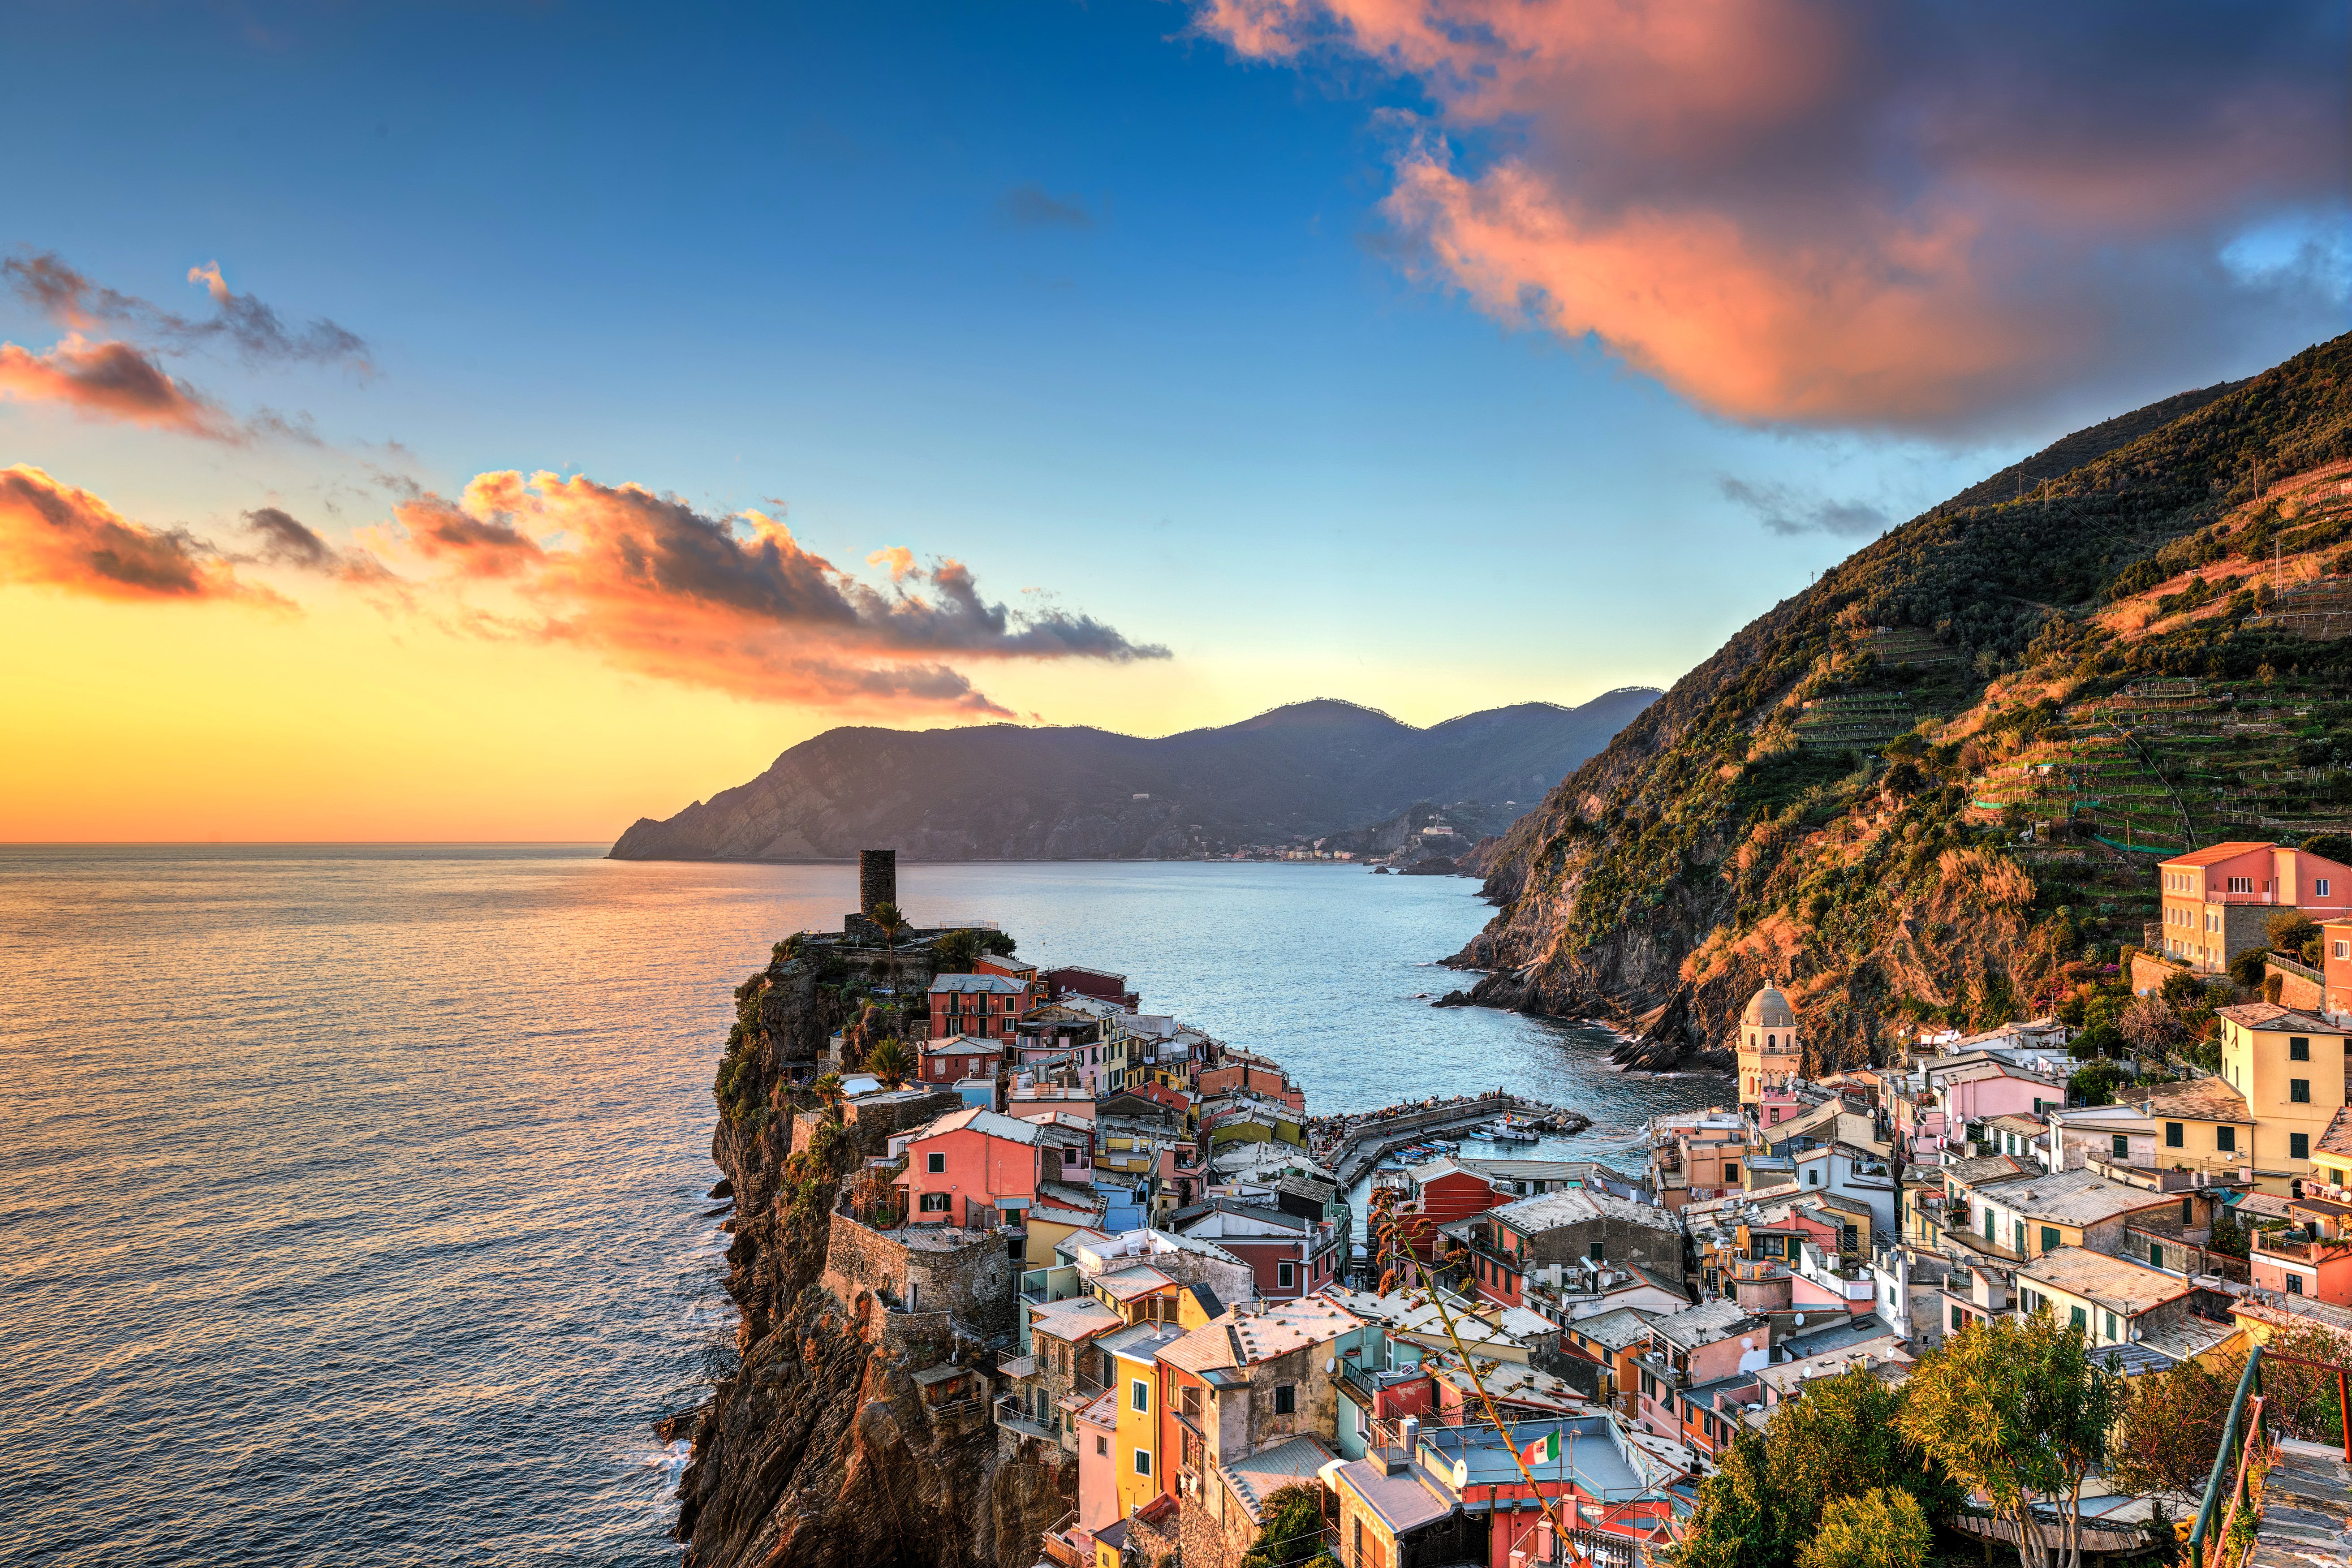 italy, Houses, Coast, Mountains, Sky, Clouds, Vernazza, Cities